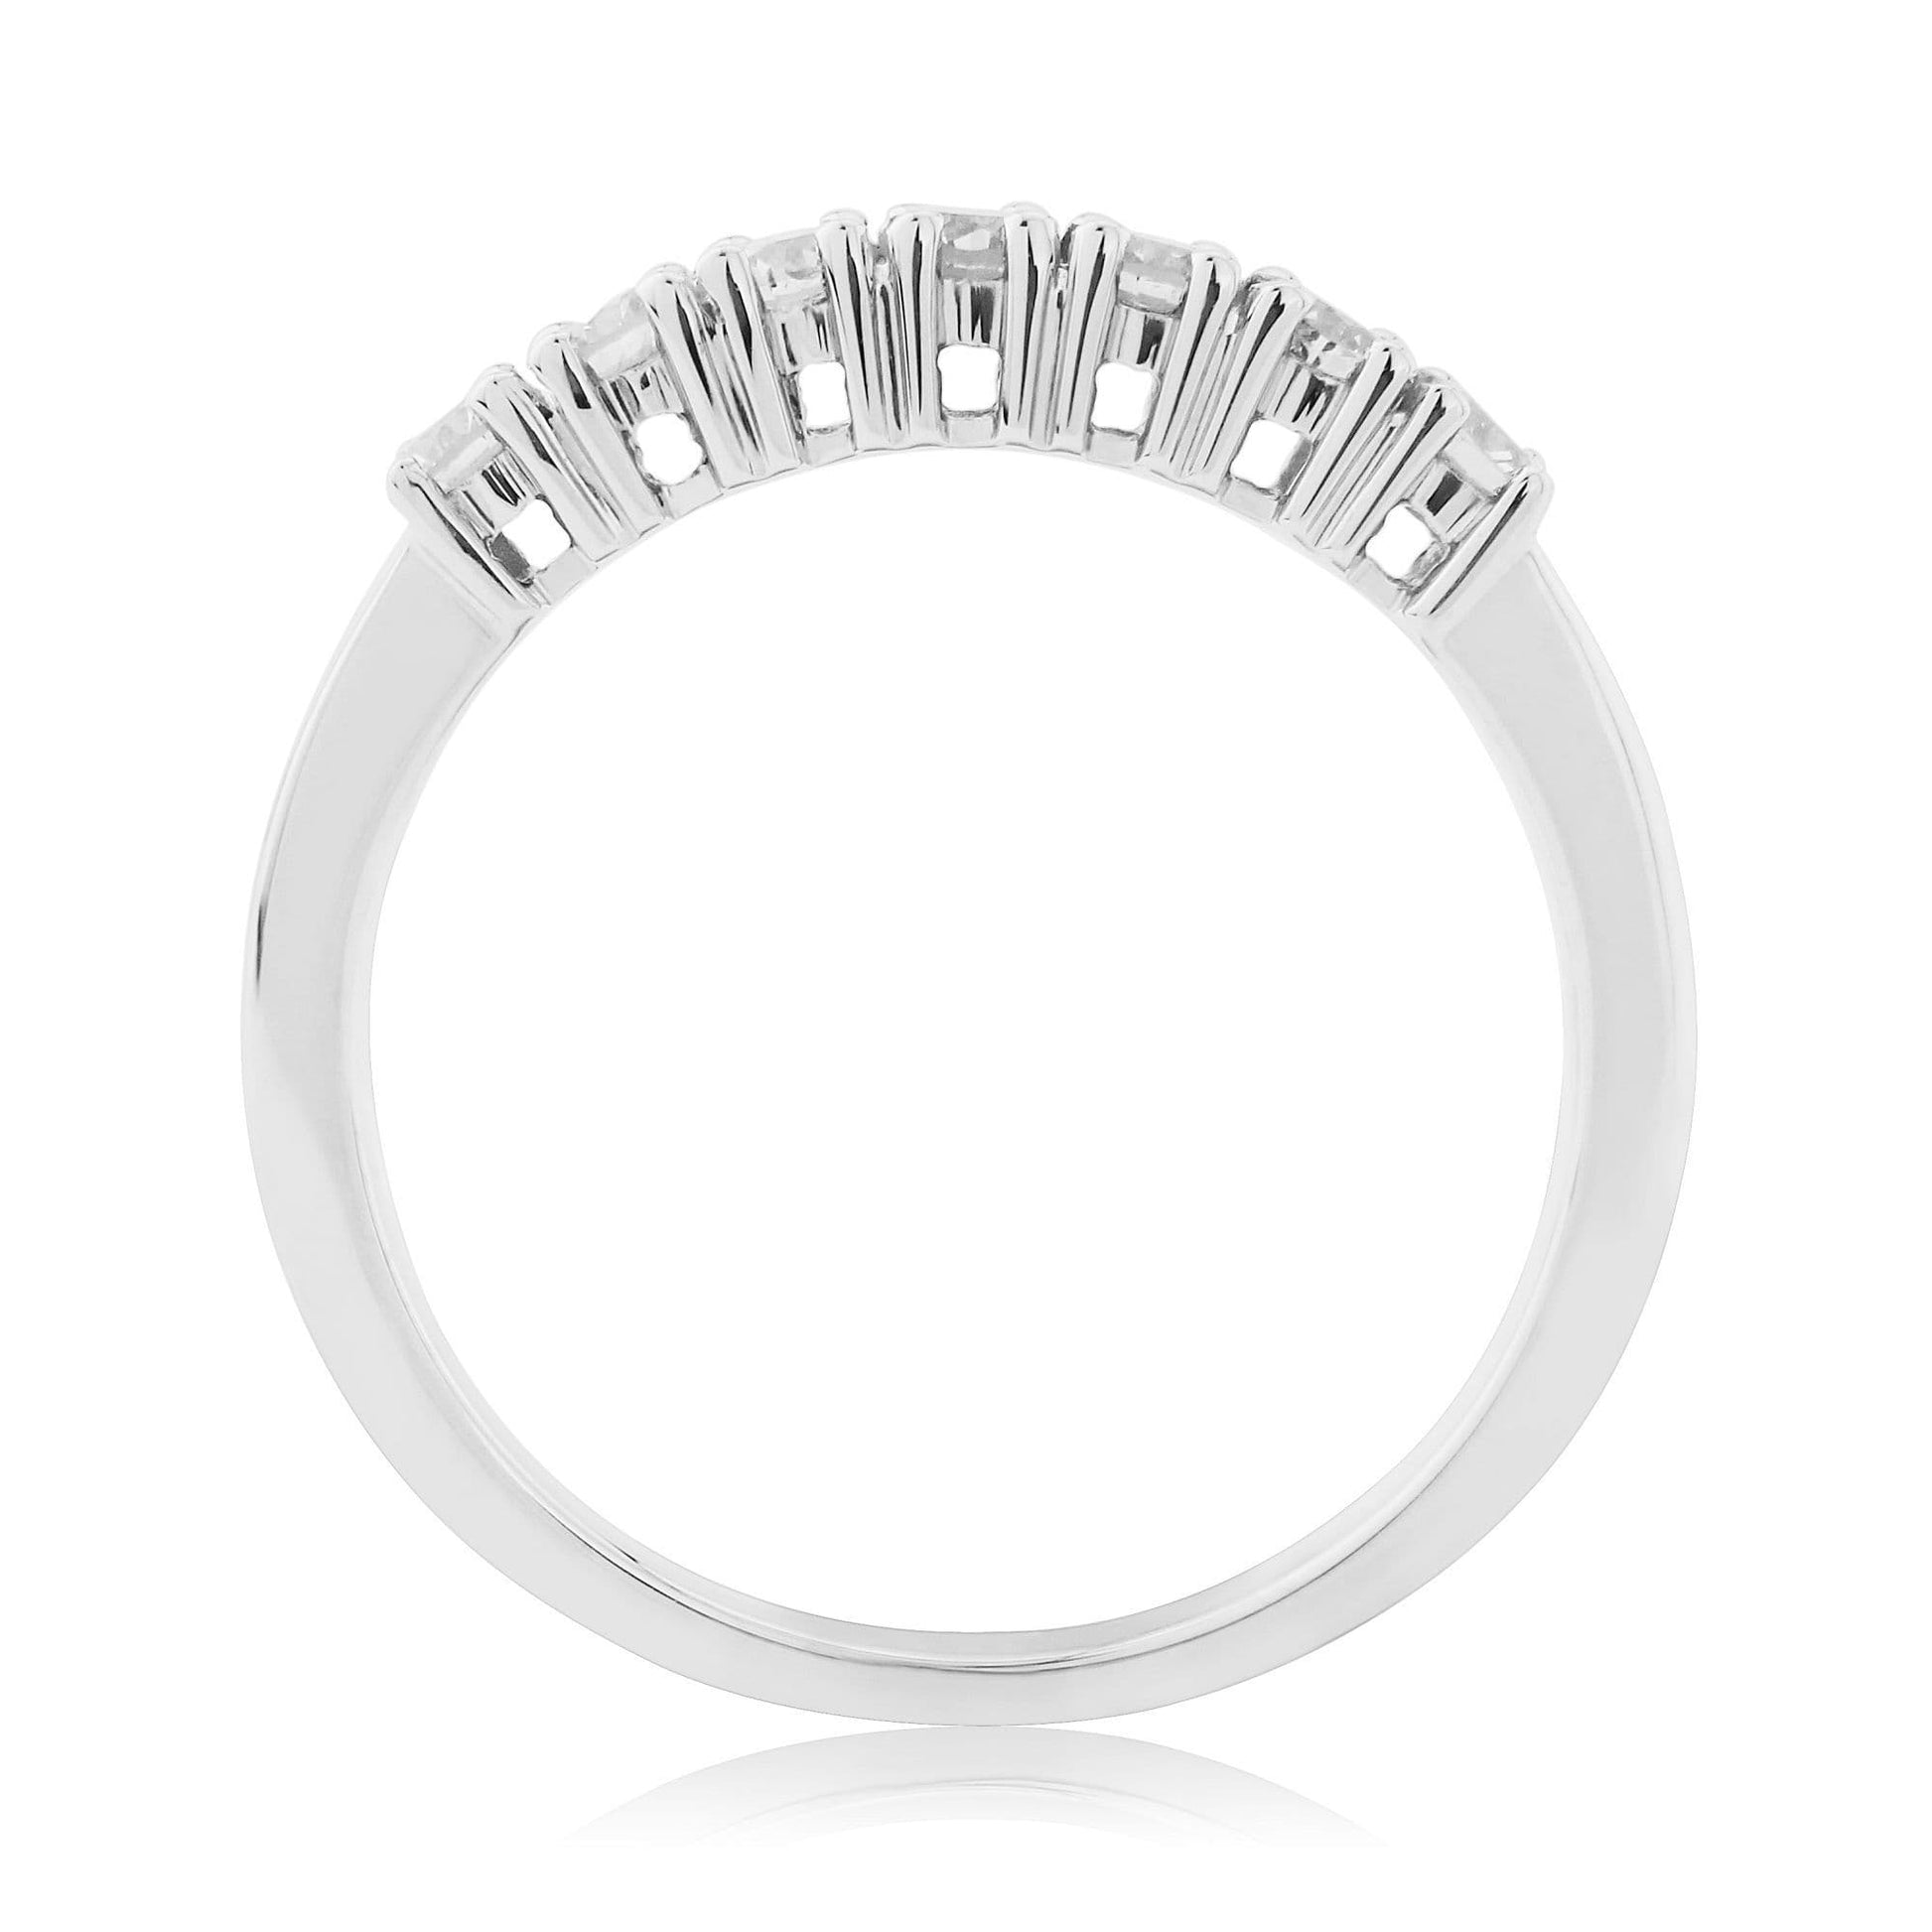 Platinum half carat diamond eternity ring With a simple clawed setting